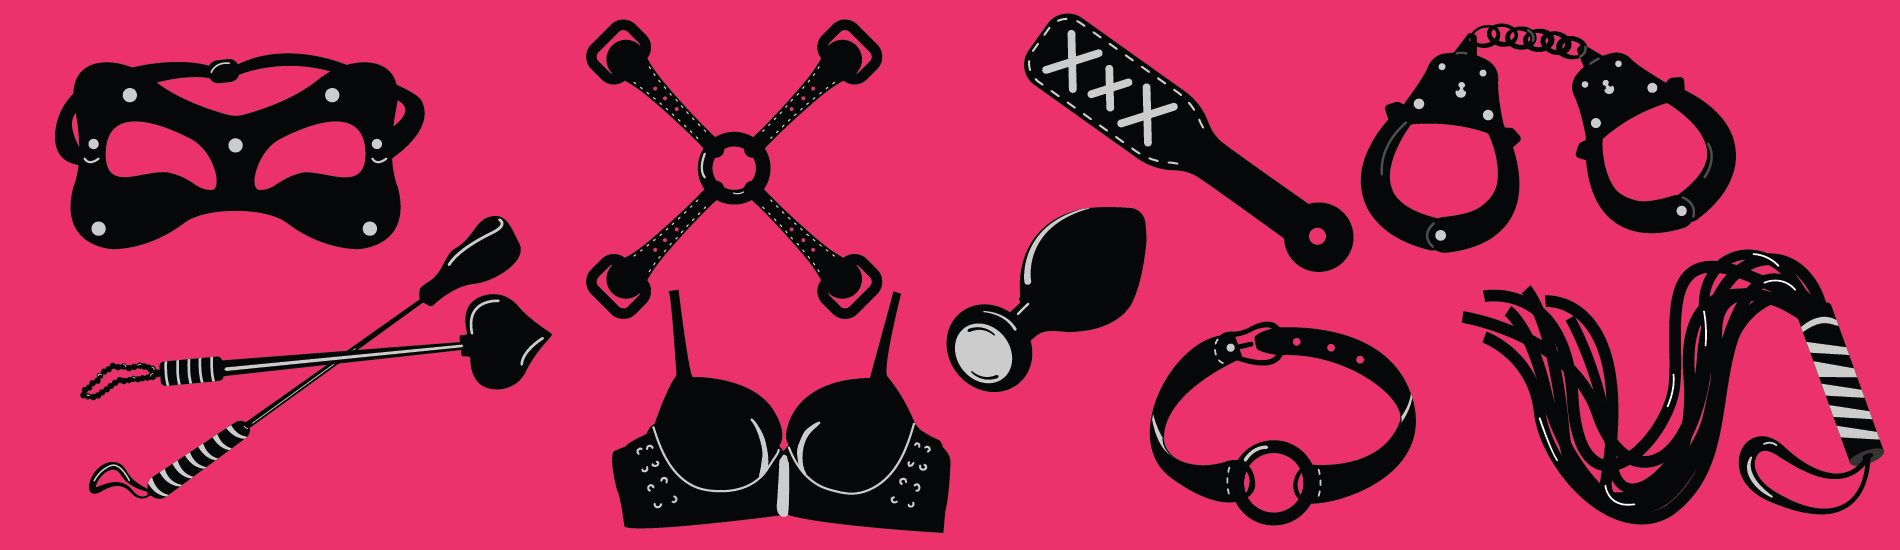 Illustration of Bondage and BDSM Toys for Sexual Domination